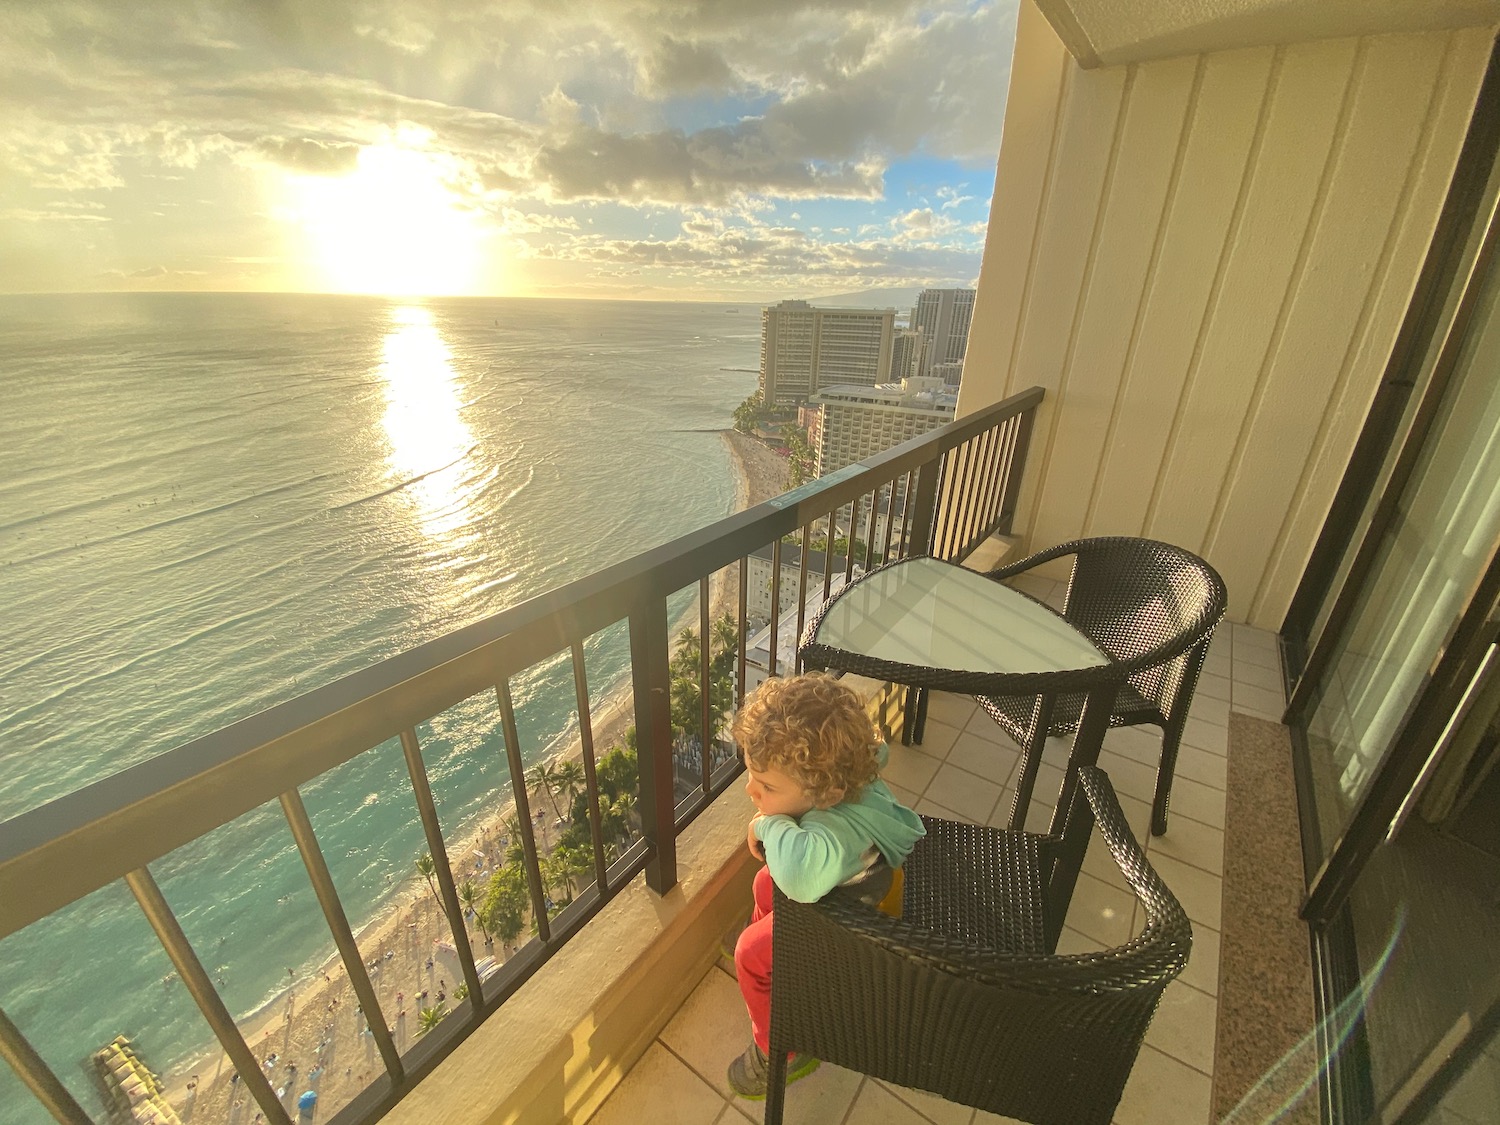 a child sitting on a chair on a balcony overlooking the ocean